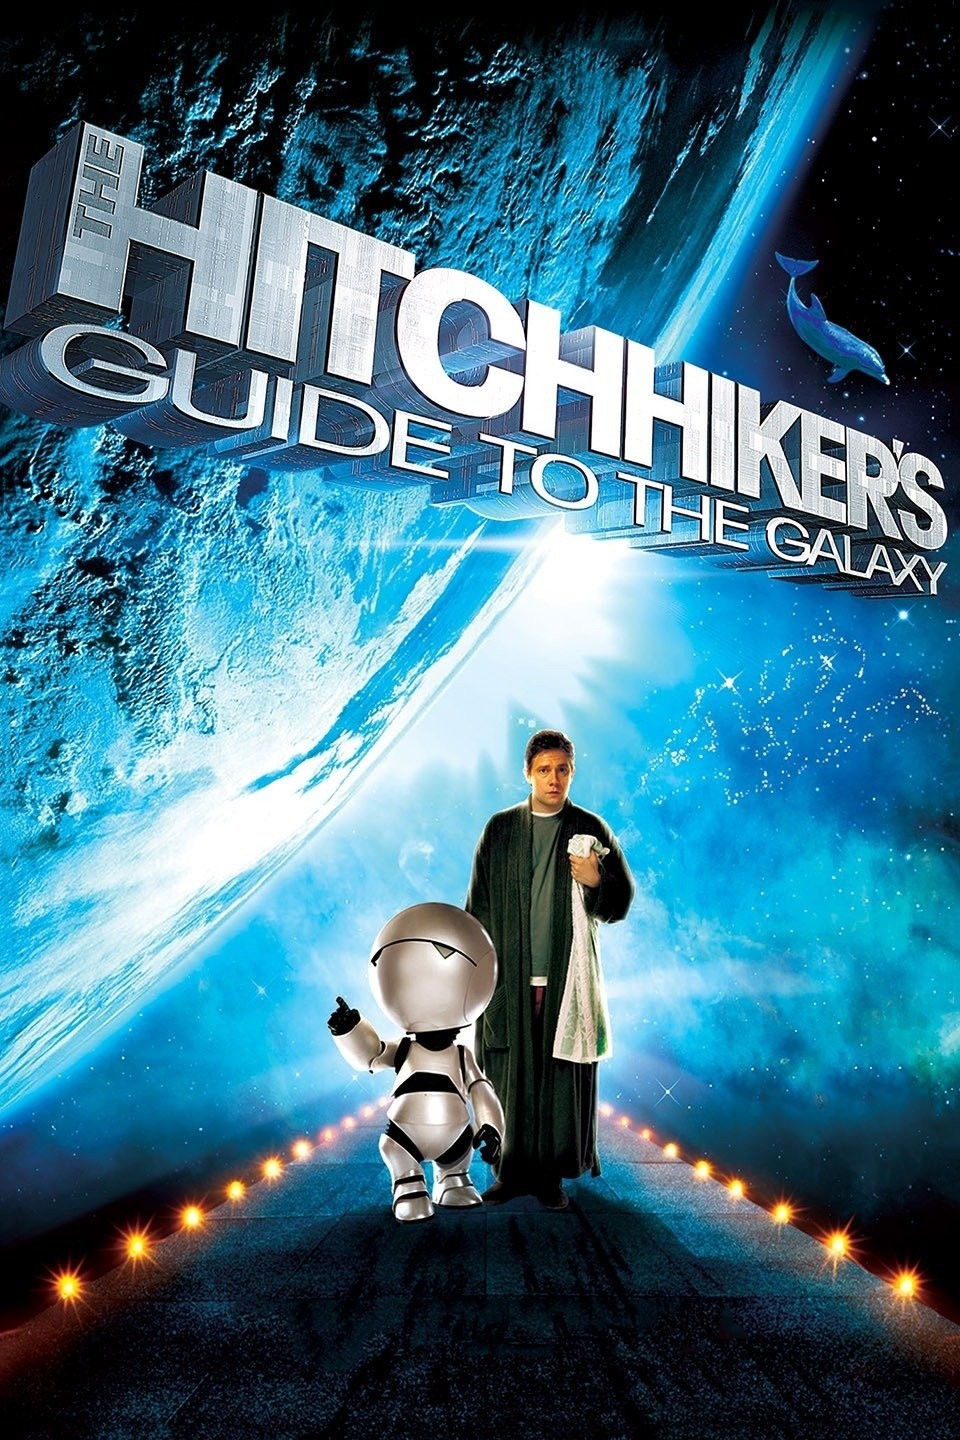 1984: The Hitchhiker's Guide to the Galaxy